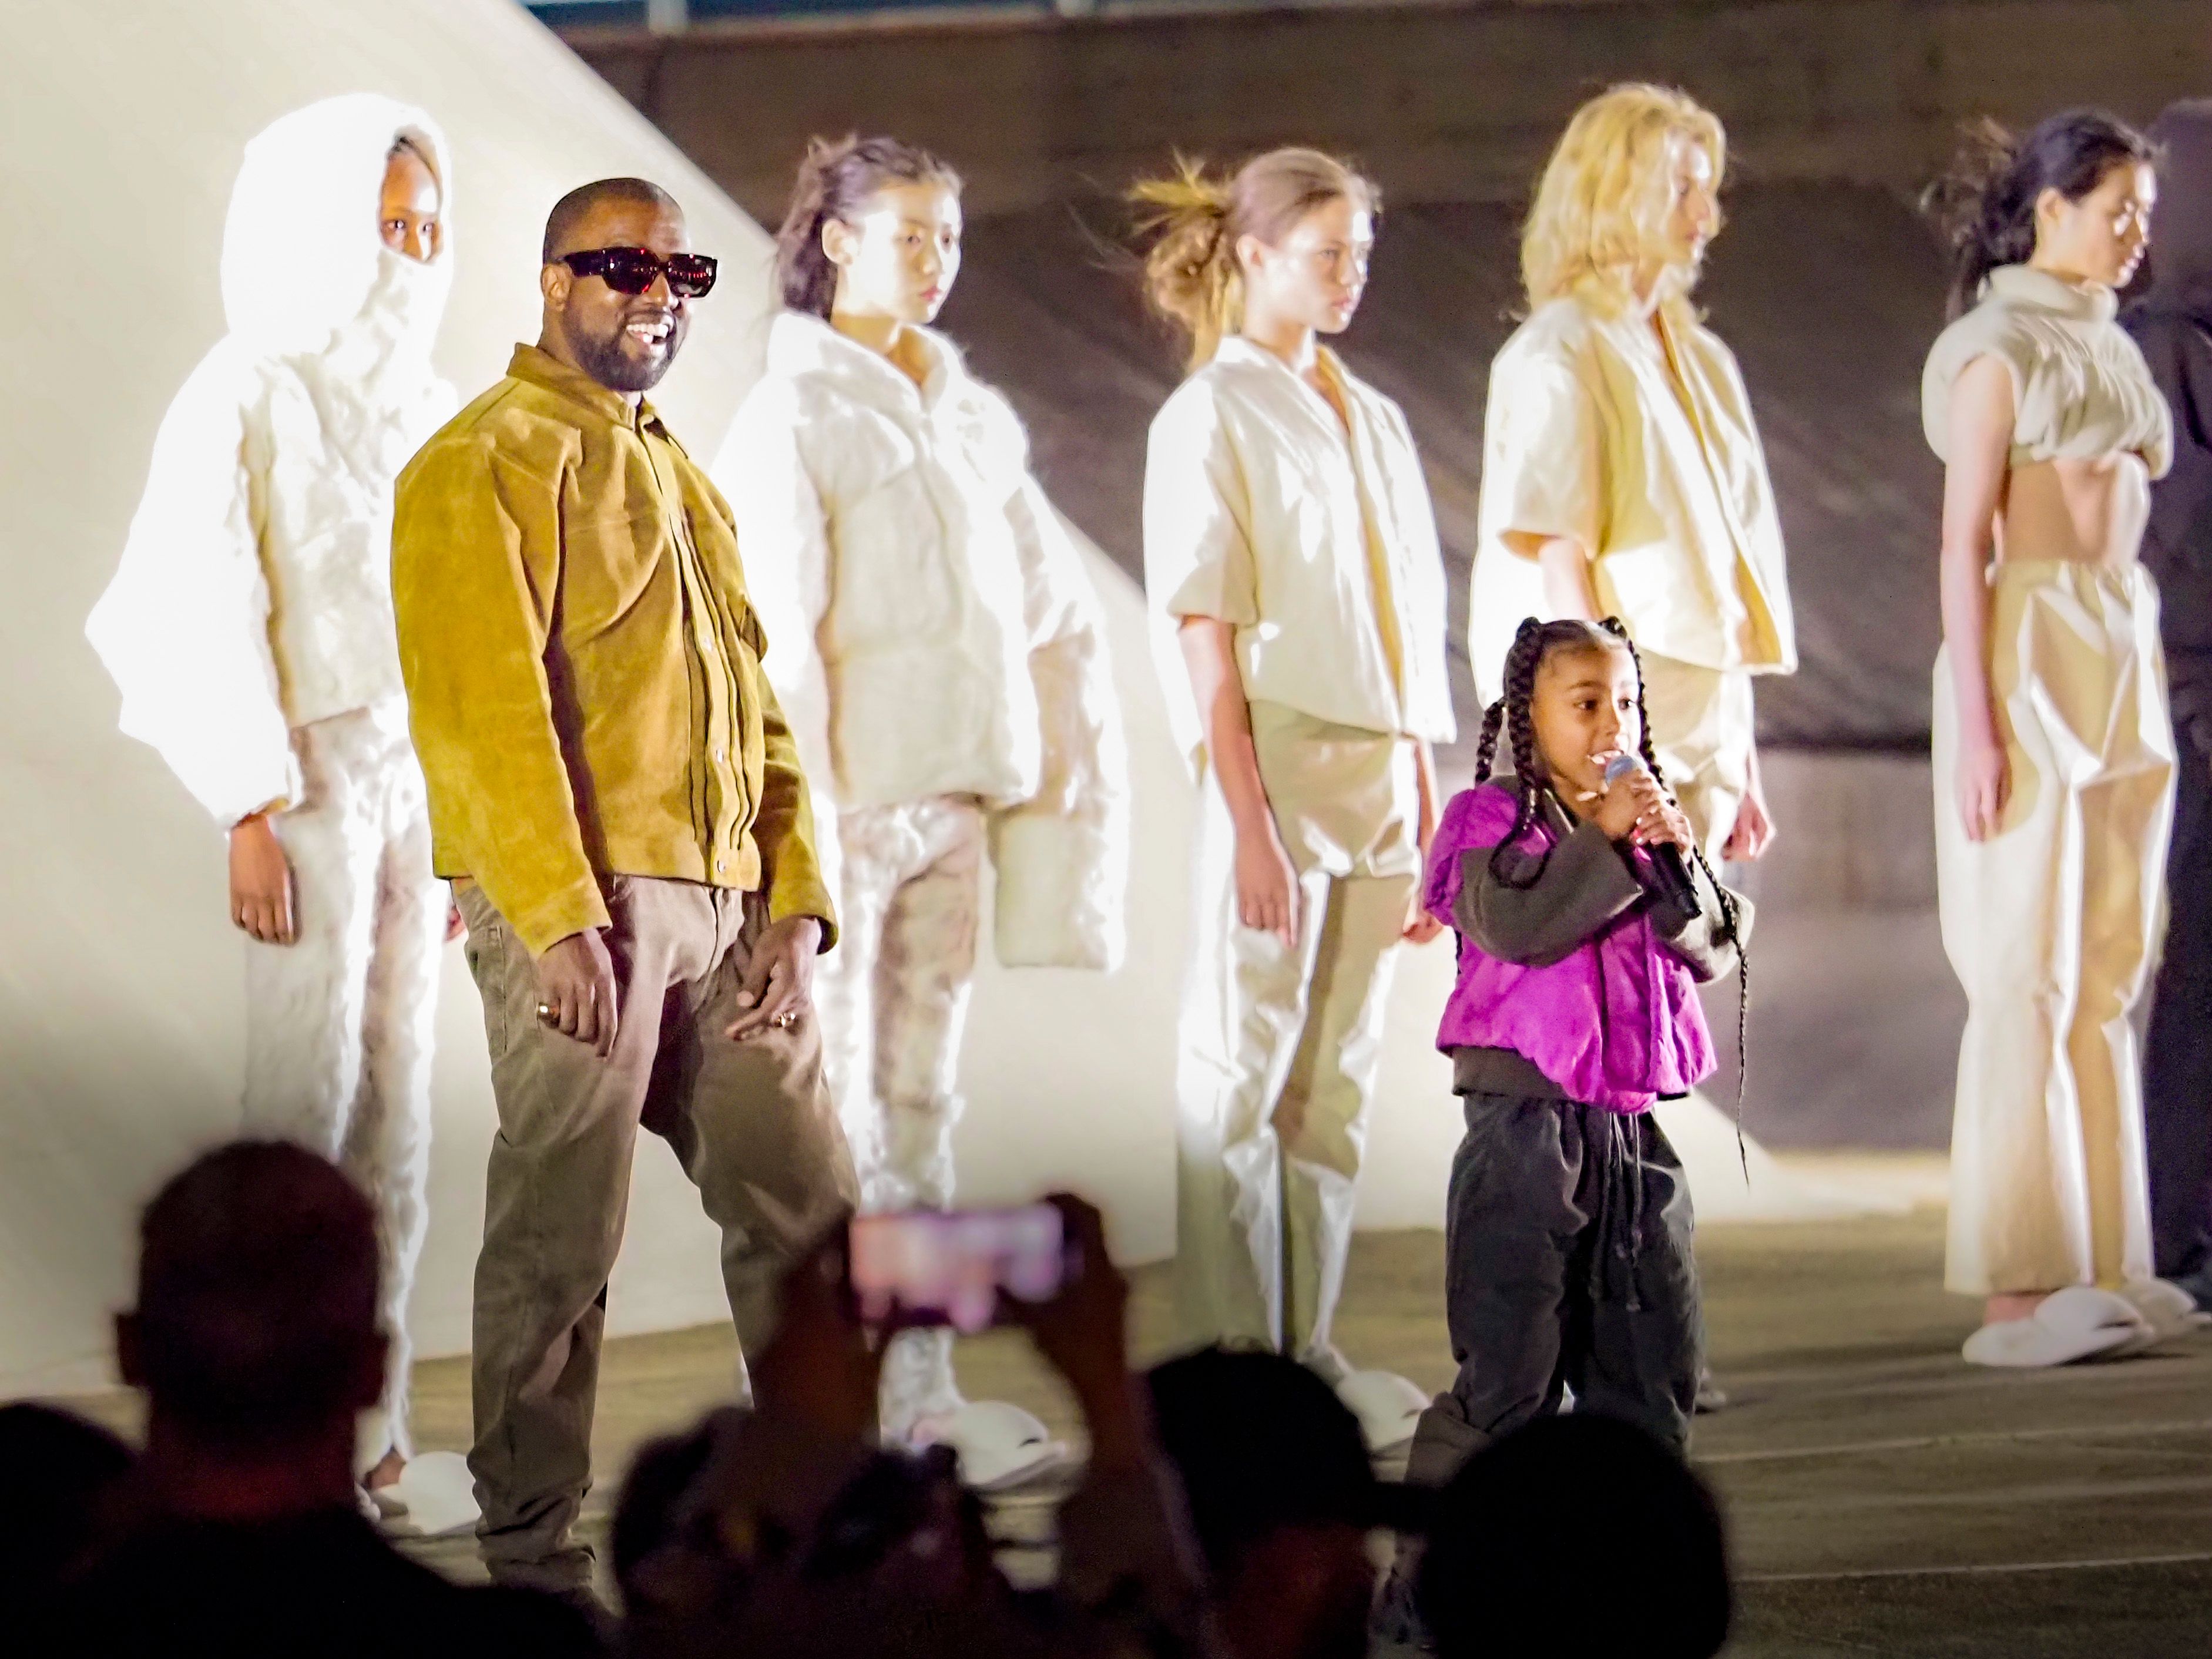 There's No One That's Not Welcome”: Kanye West on YZY, Paris and